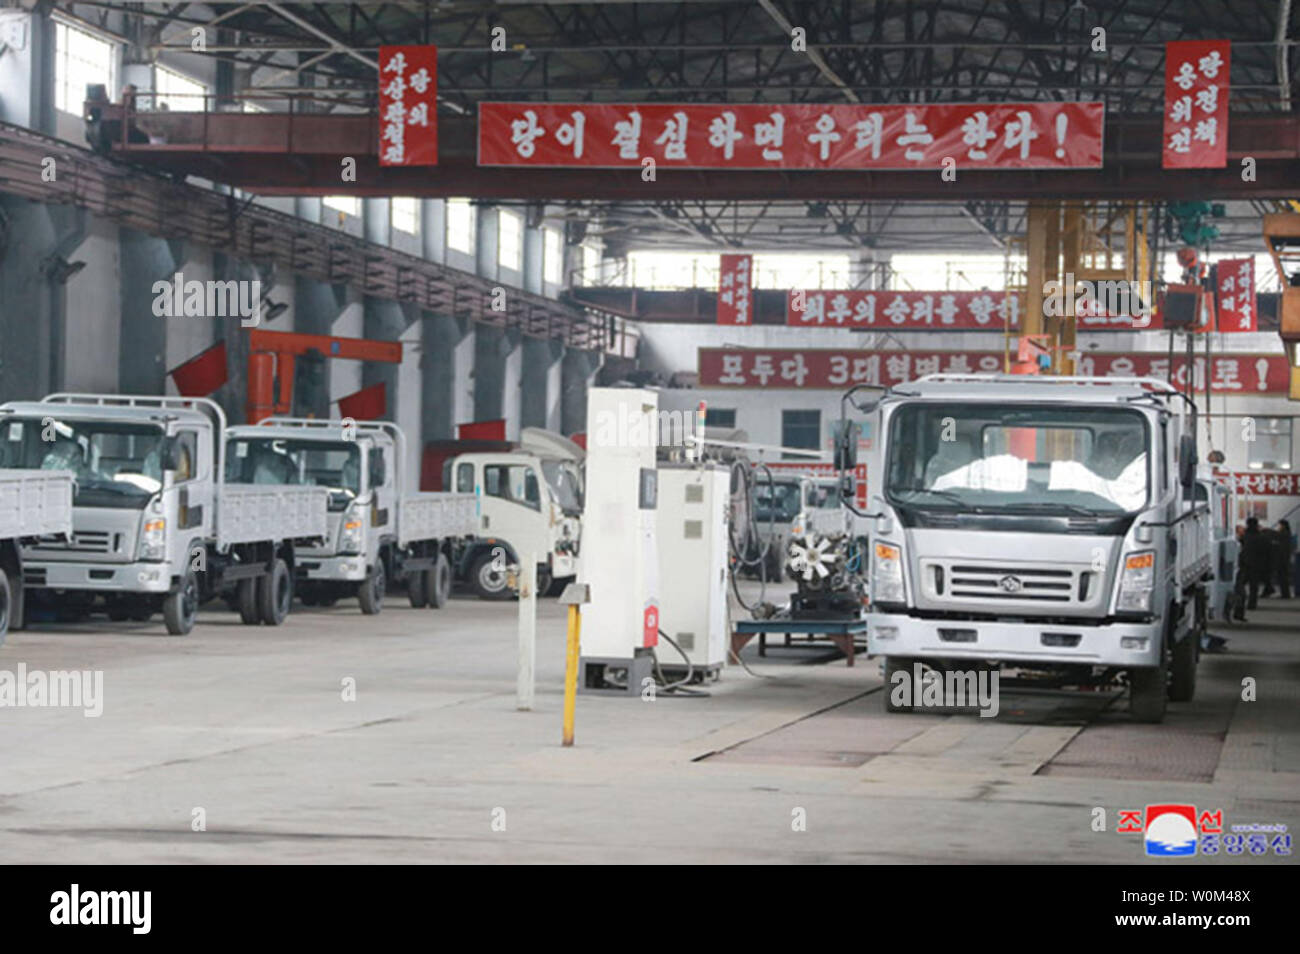 This image released on November 21, 2017, by the North Korean Official News Service (KCNA), shows North Korean leader Kim Jong Un visited the Sungri Motor Complex in Pyongyang. During his tour of the facilities, Kim took the wheel of a newly manufactured truck to experience its performance and technical capabilities. Accompanying him were O Su Yong and Pak Thae Song, vice-chairmen of the C.C., Workers' Party of Korea (WPK), and Jo Yong Won, vice department director of the C.C., WPK. Photo by KCNA/UPI Stock Photo